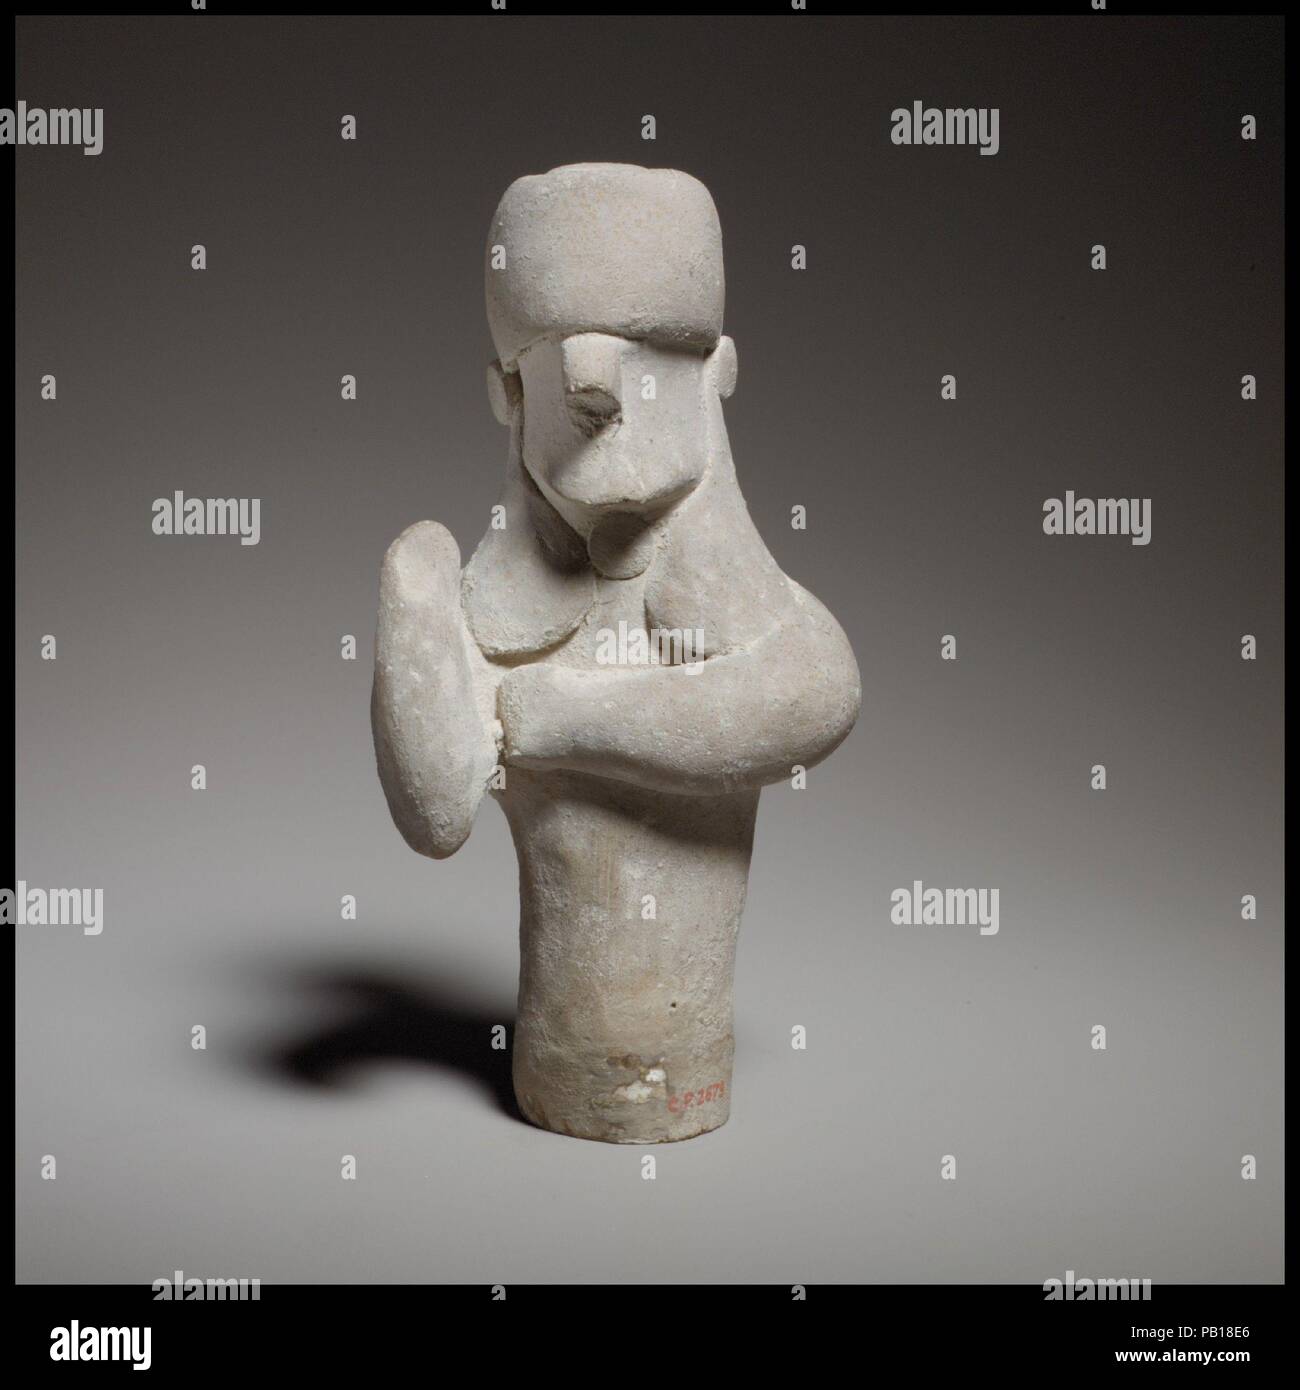 Standing male figurine. Culture: Cypriot. Dimensions: H. 6 1/16 in. (15.4 cm). Date: ca. 600-480 B.C..  The cylindrical body, the lower part of which is missing, is handmade and solid. Museum: Metropolitan Museum of Art, New York, USA. Stock Photo